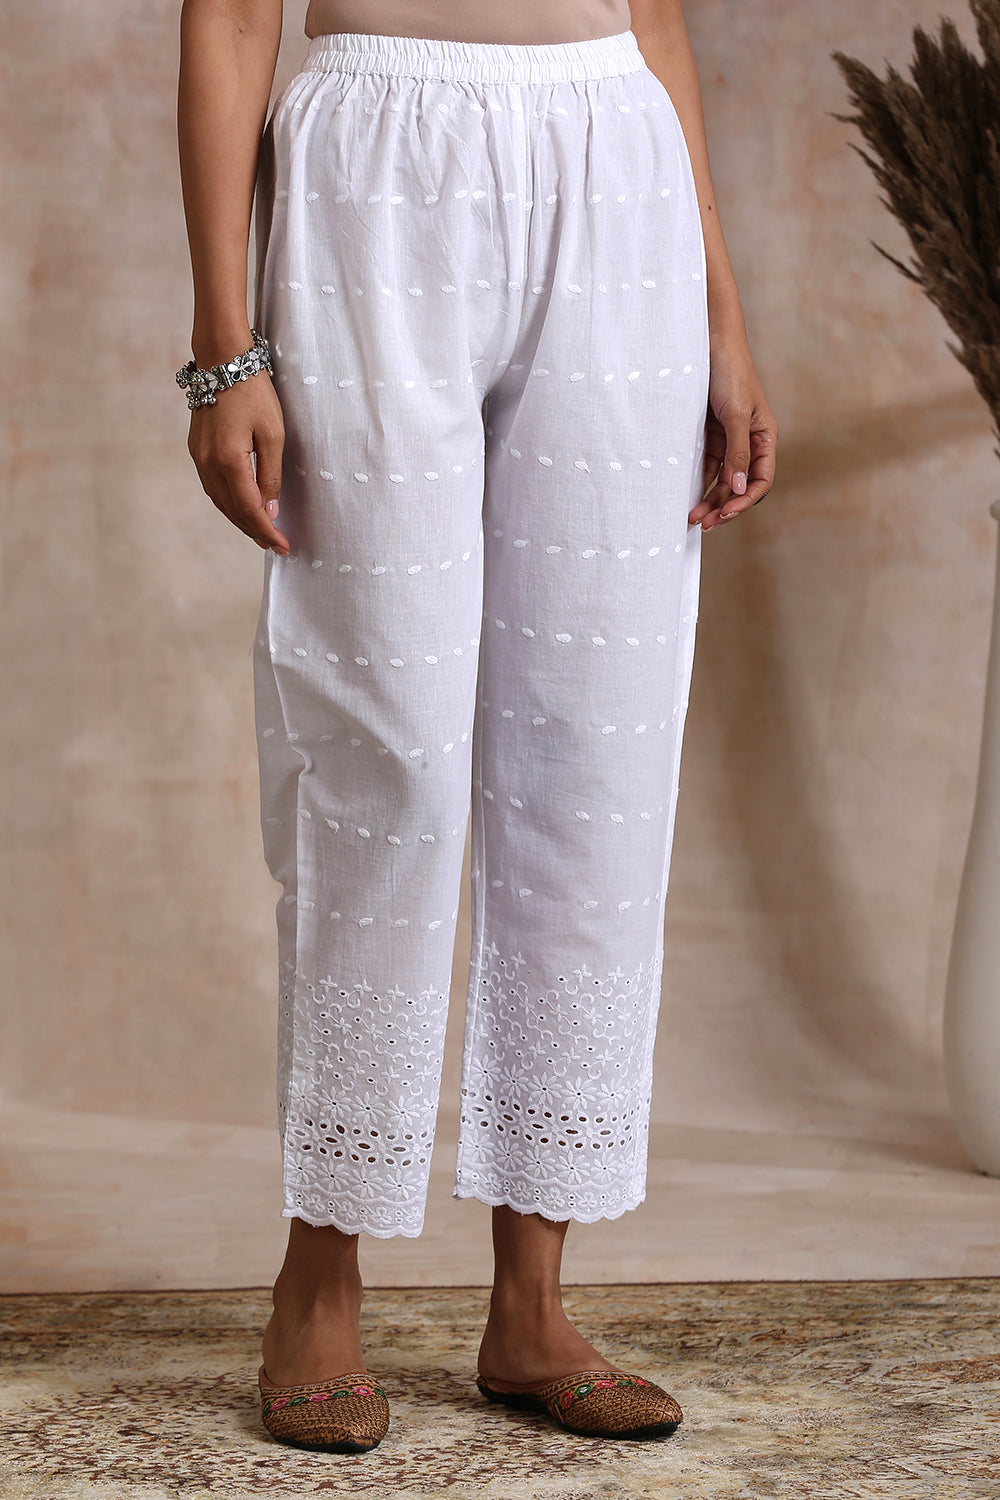 Kate Pretty Solid Cotton Women Harem Pants - Buy Kate Pretty Solid Cotton  Women Harem Pants Online at Best Prices in India | Flipkart.com